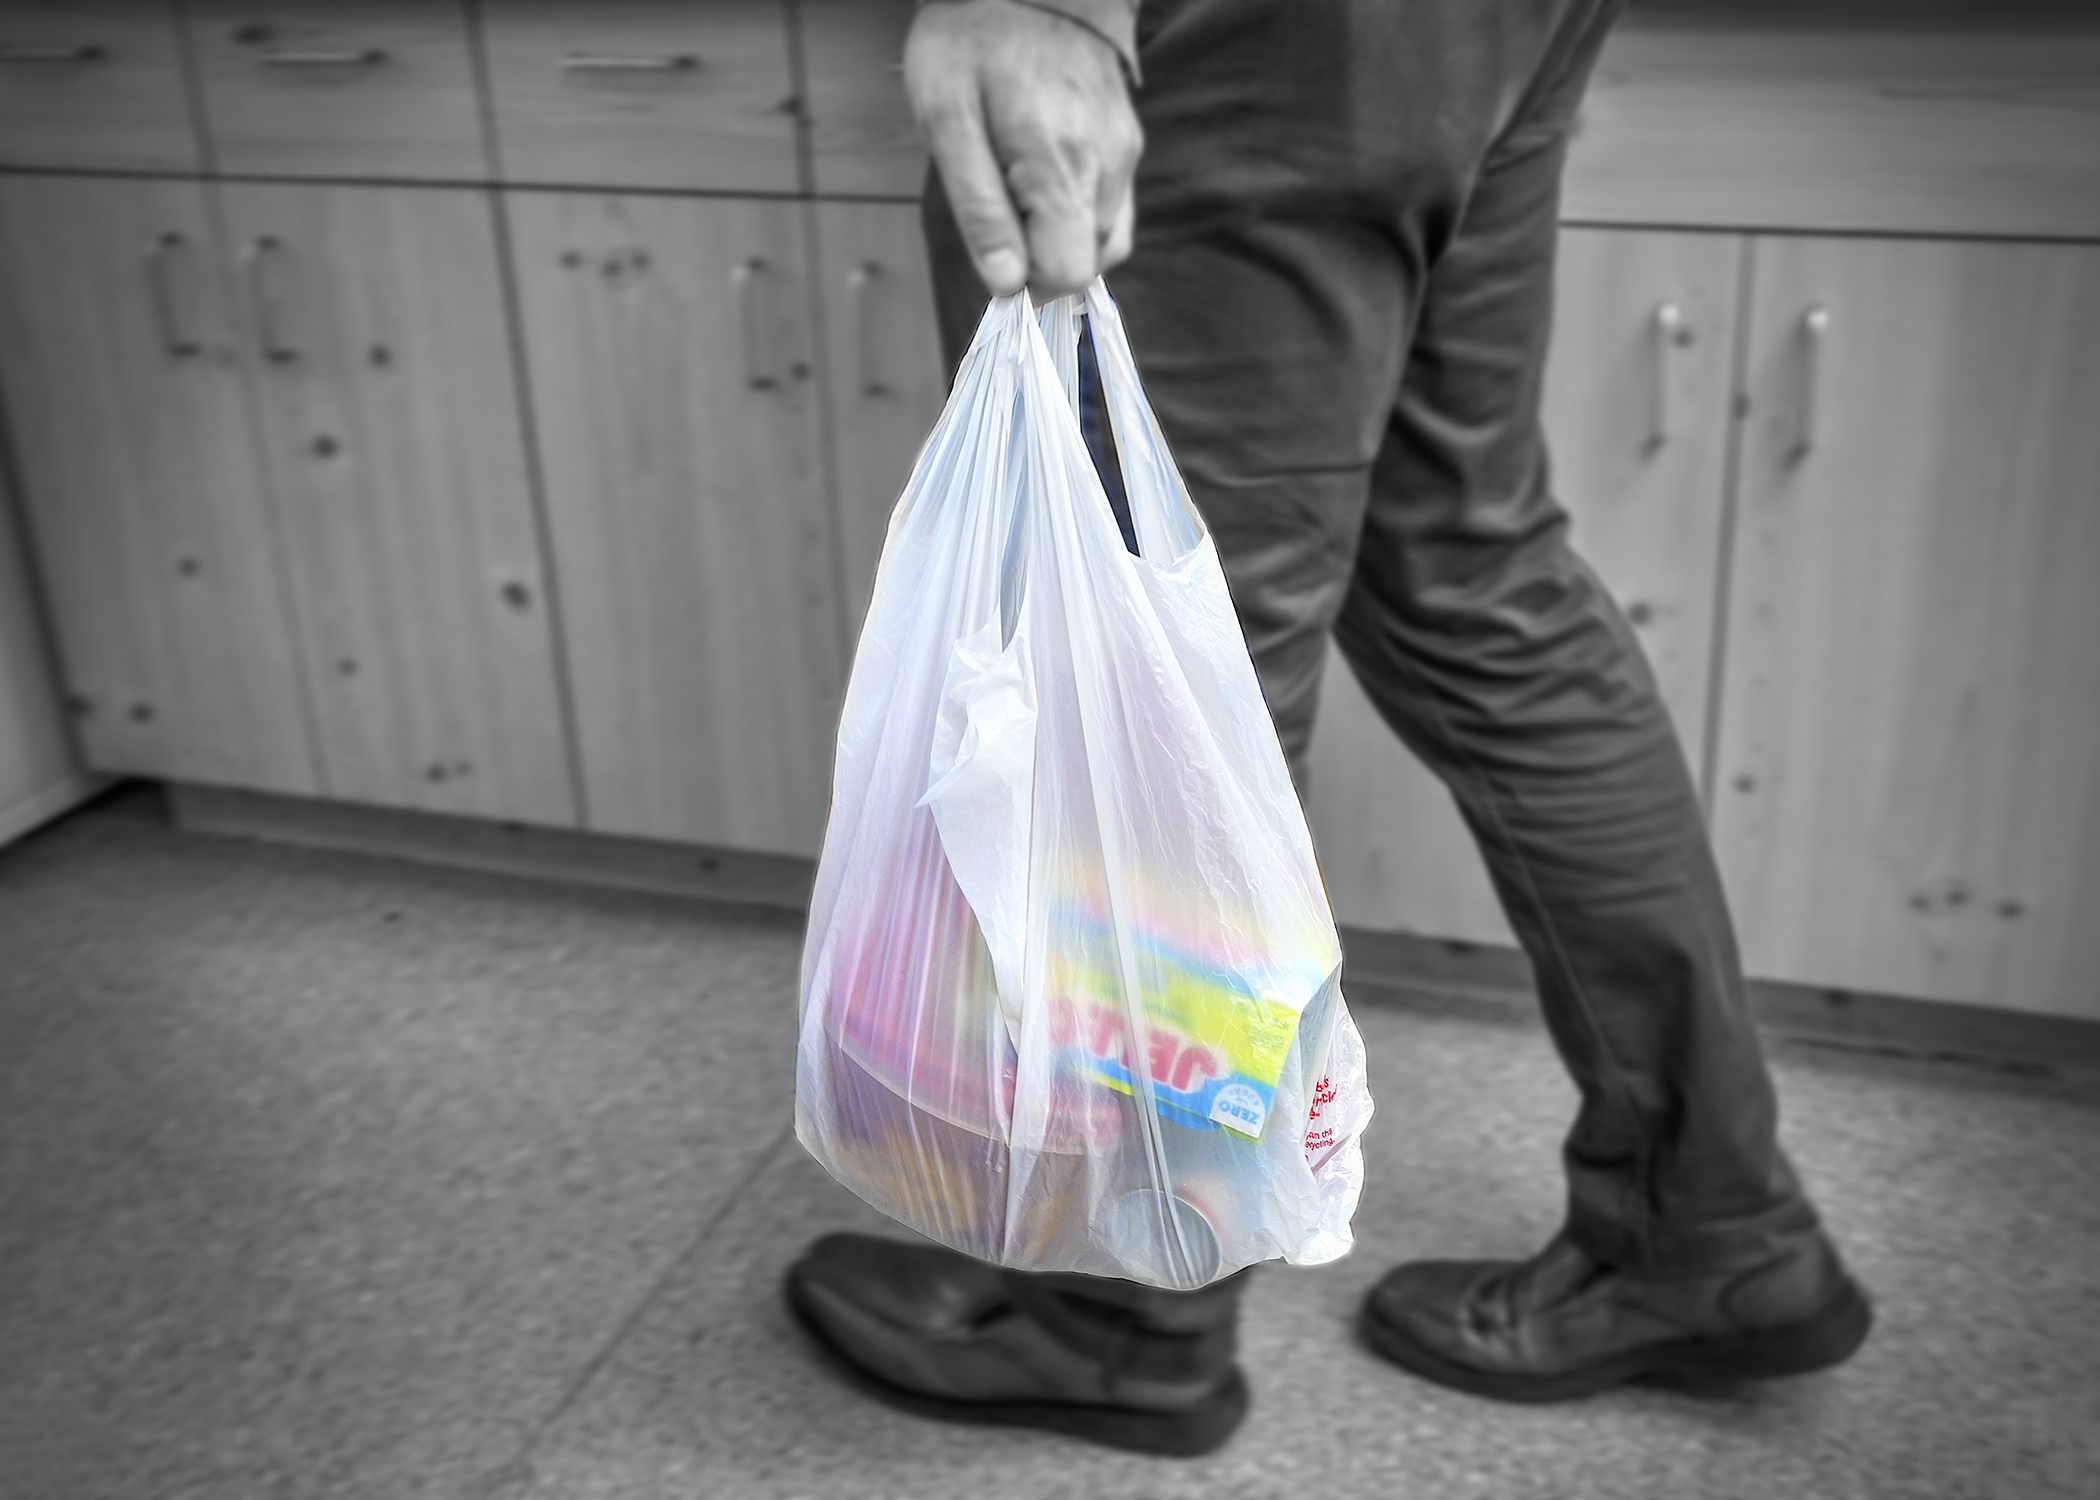  HF3345 would repeal a statute passed in 2017 that, in part, prohibits a political subdivision from imposing a bag ban on merchants. (Photo illustration by Andrew VonBank)